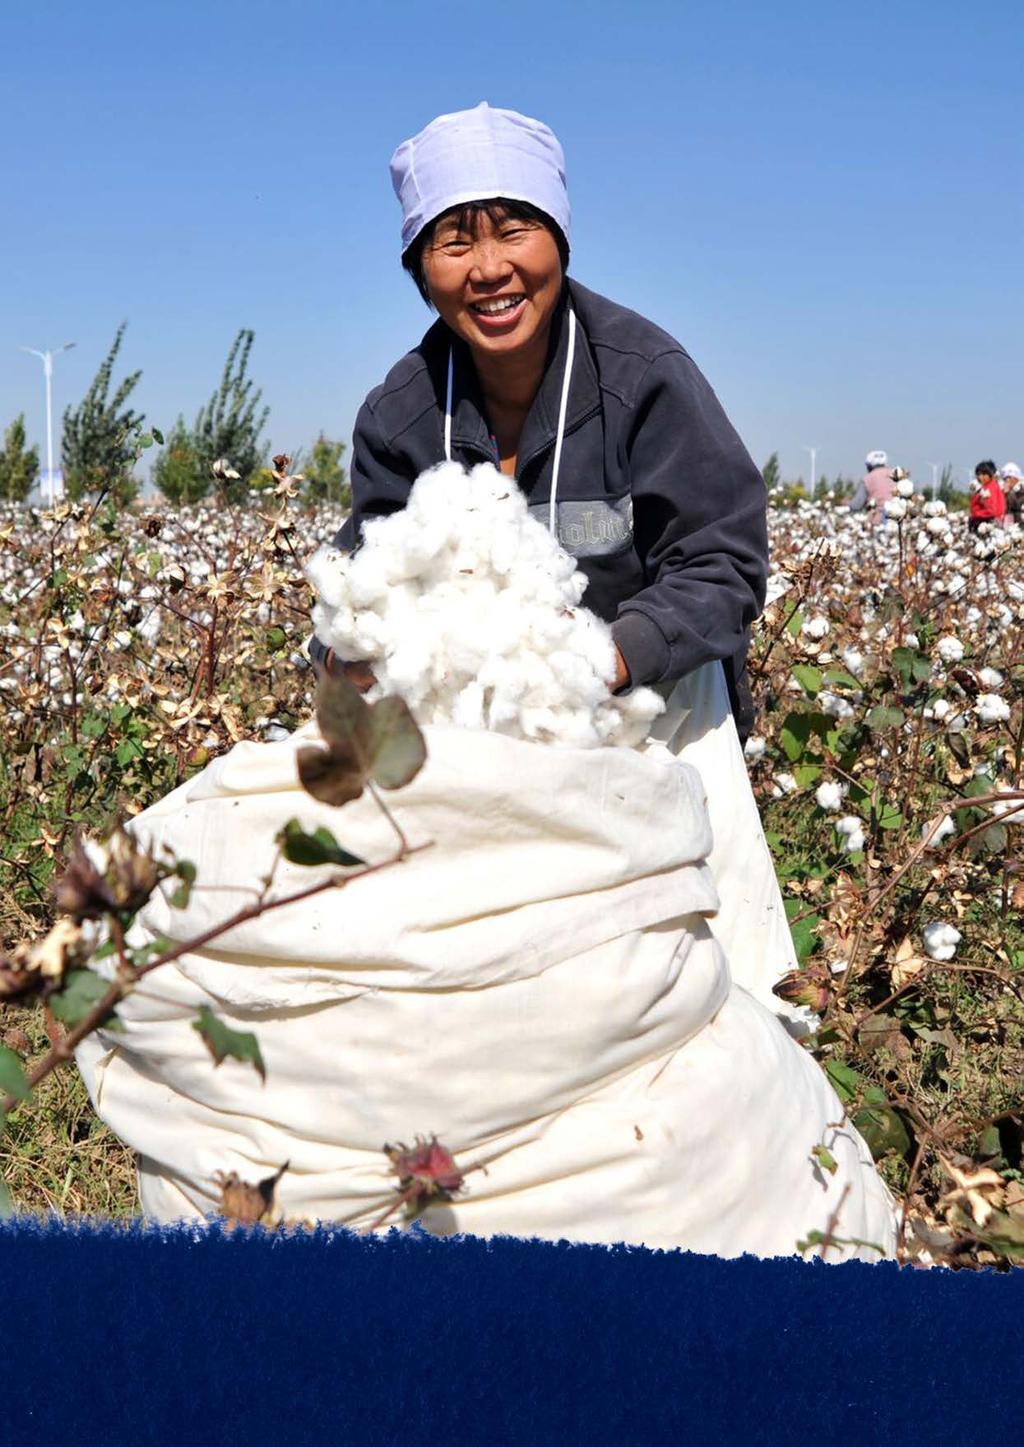 COTTONCONNECT IS AN ENTERPRISE WITH A SOCIAL MISSION PIONEERING A TRANSPARENT AND SUSTAINABLE COTTON SUPPLY CHAIN FROM RETAILERS TO FARMERS TO BUILD A